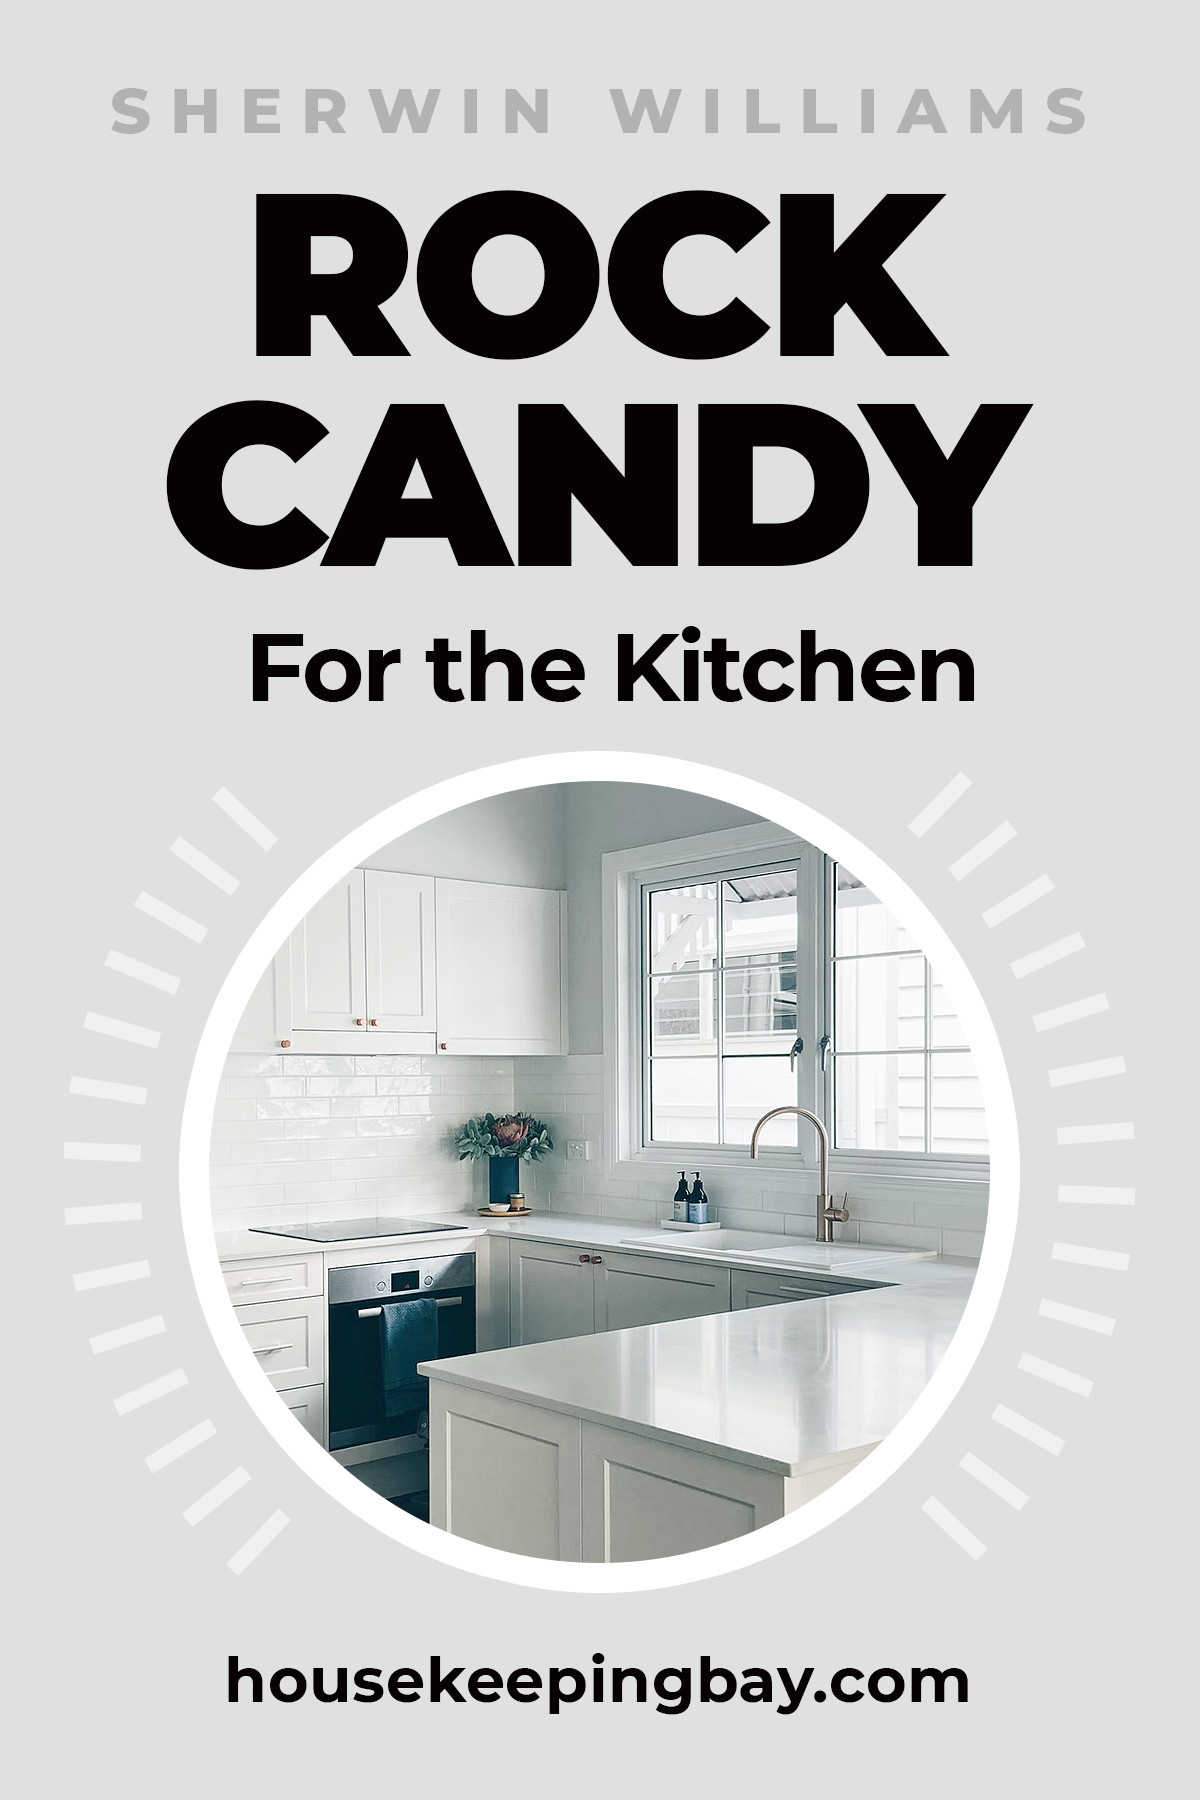 Rock Candy For the Kitchen